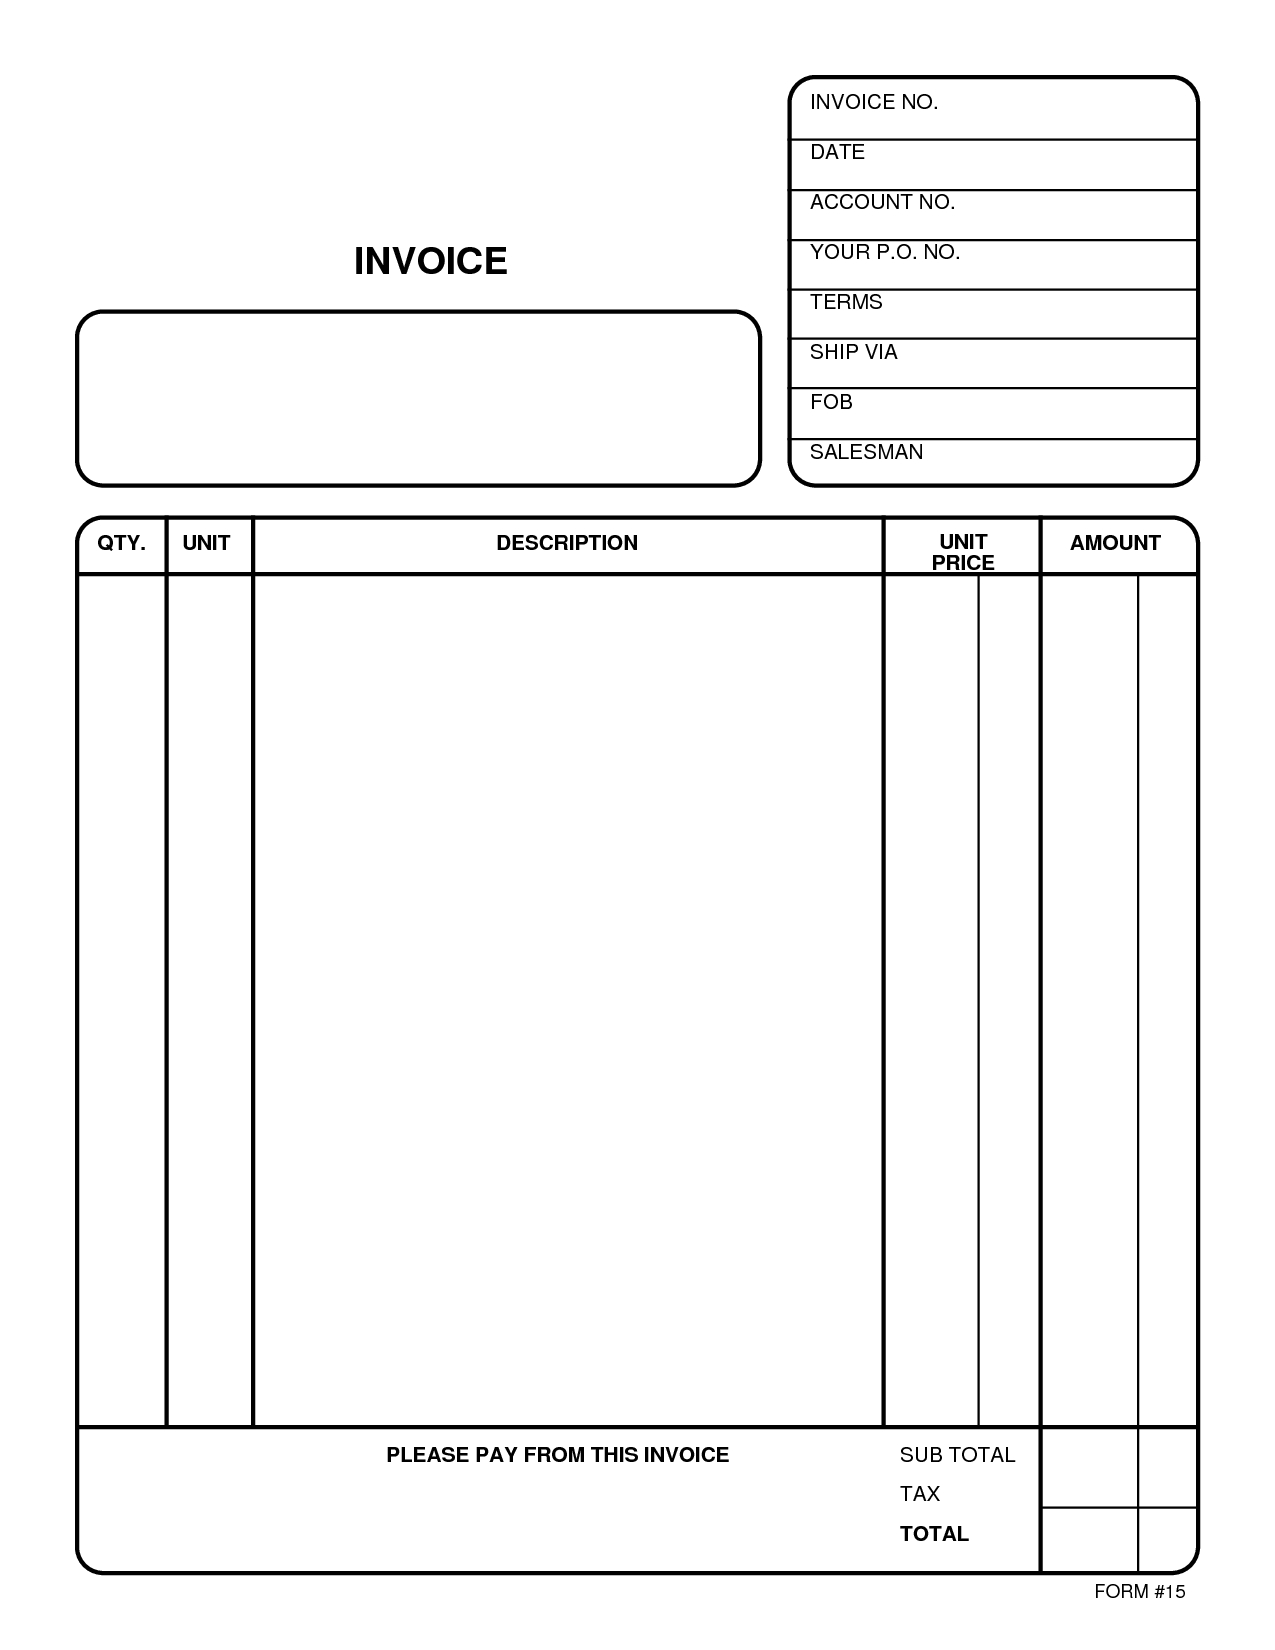 free online invoice templates resume templates create a invoice free